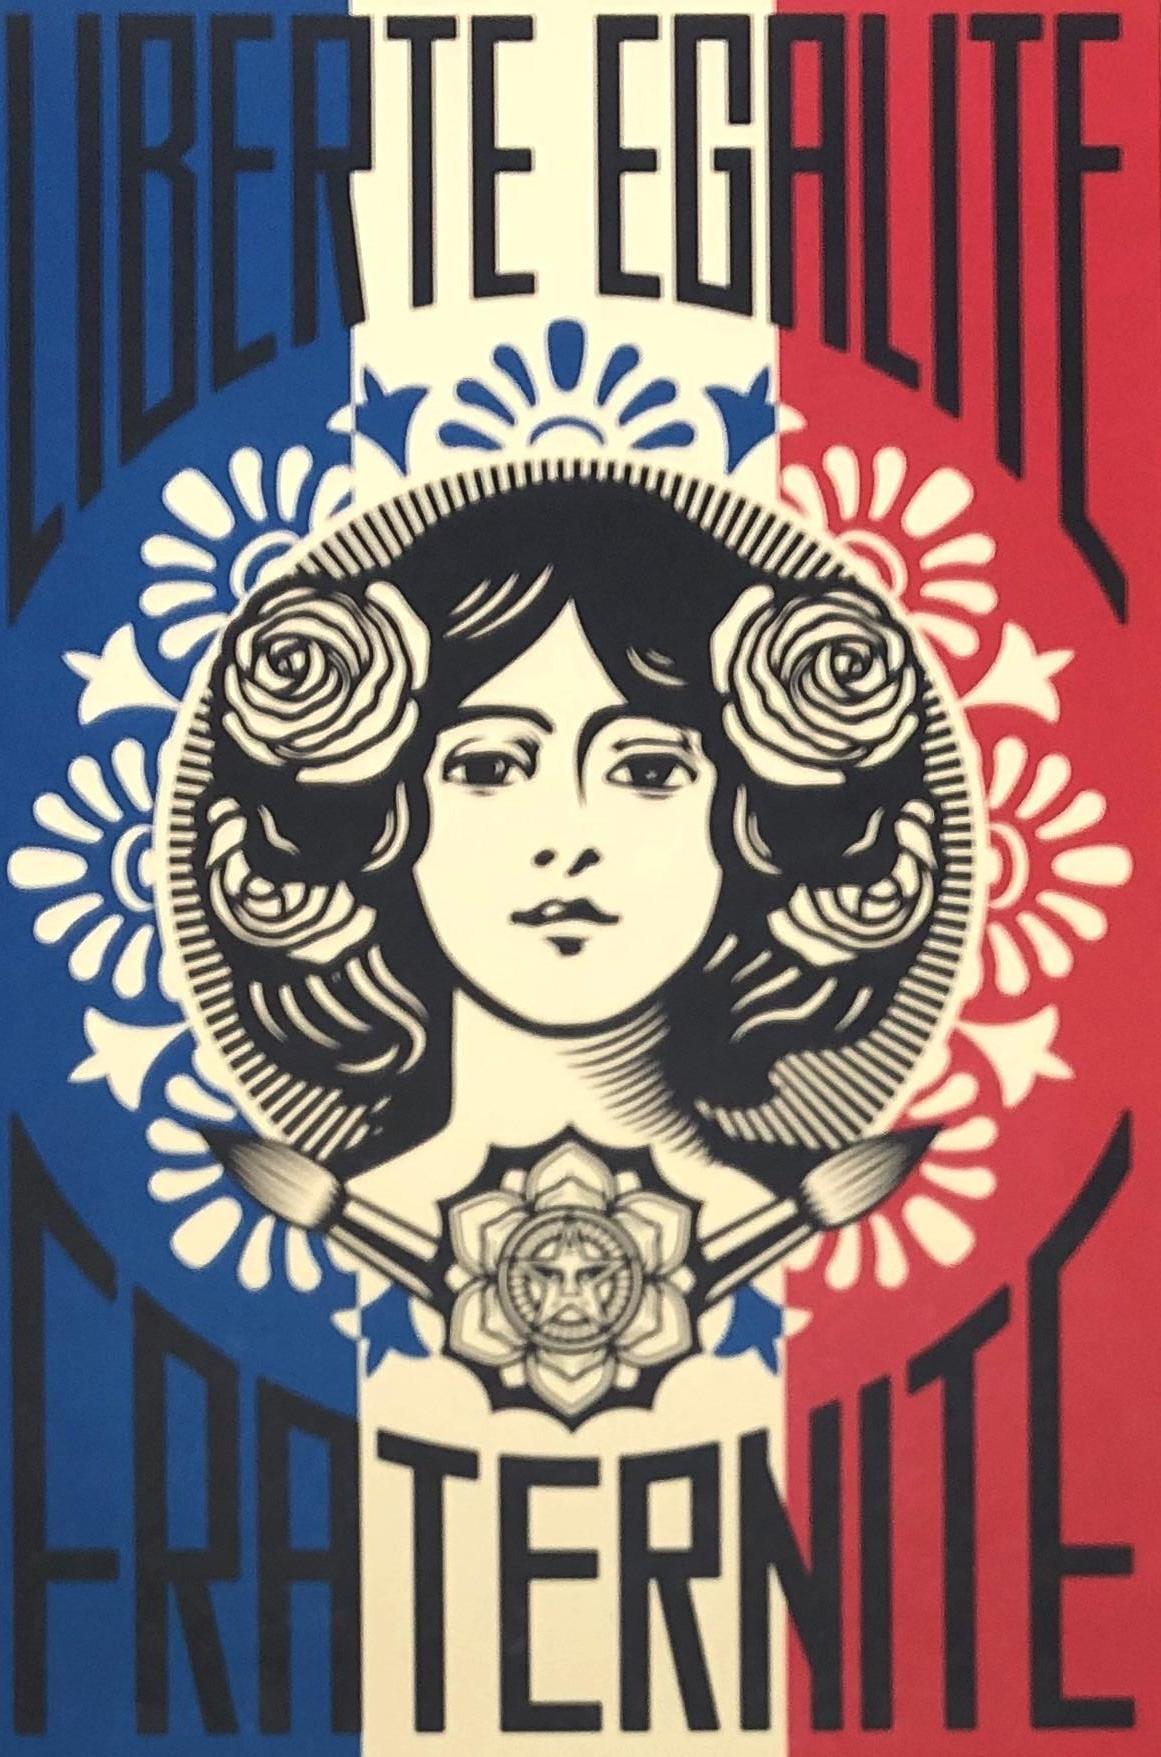 Shepard Fairey  (Obey Giant)
Liberté égalité fraternité (Liberty Equality Fraternity)

Screenprint
Handsigned in pencil by the artist 
Unnumbered proof
Size 90 x 60 cm (c. 35,4 x 23,6 in)

Excellent condition